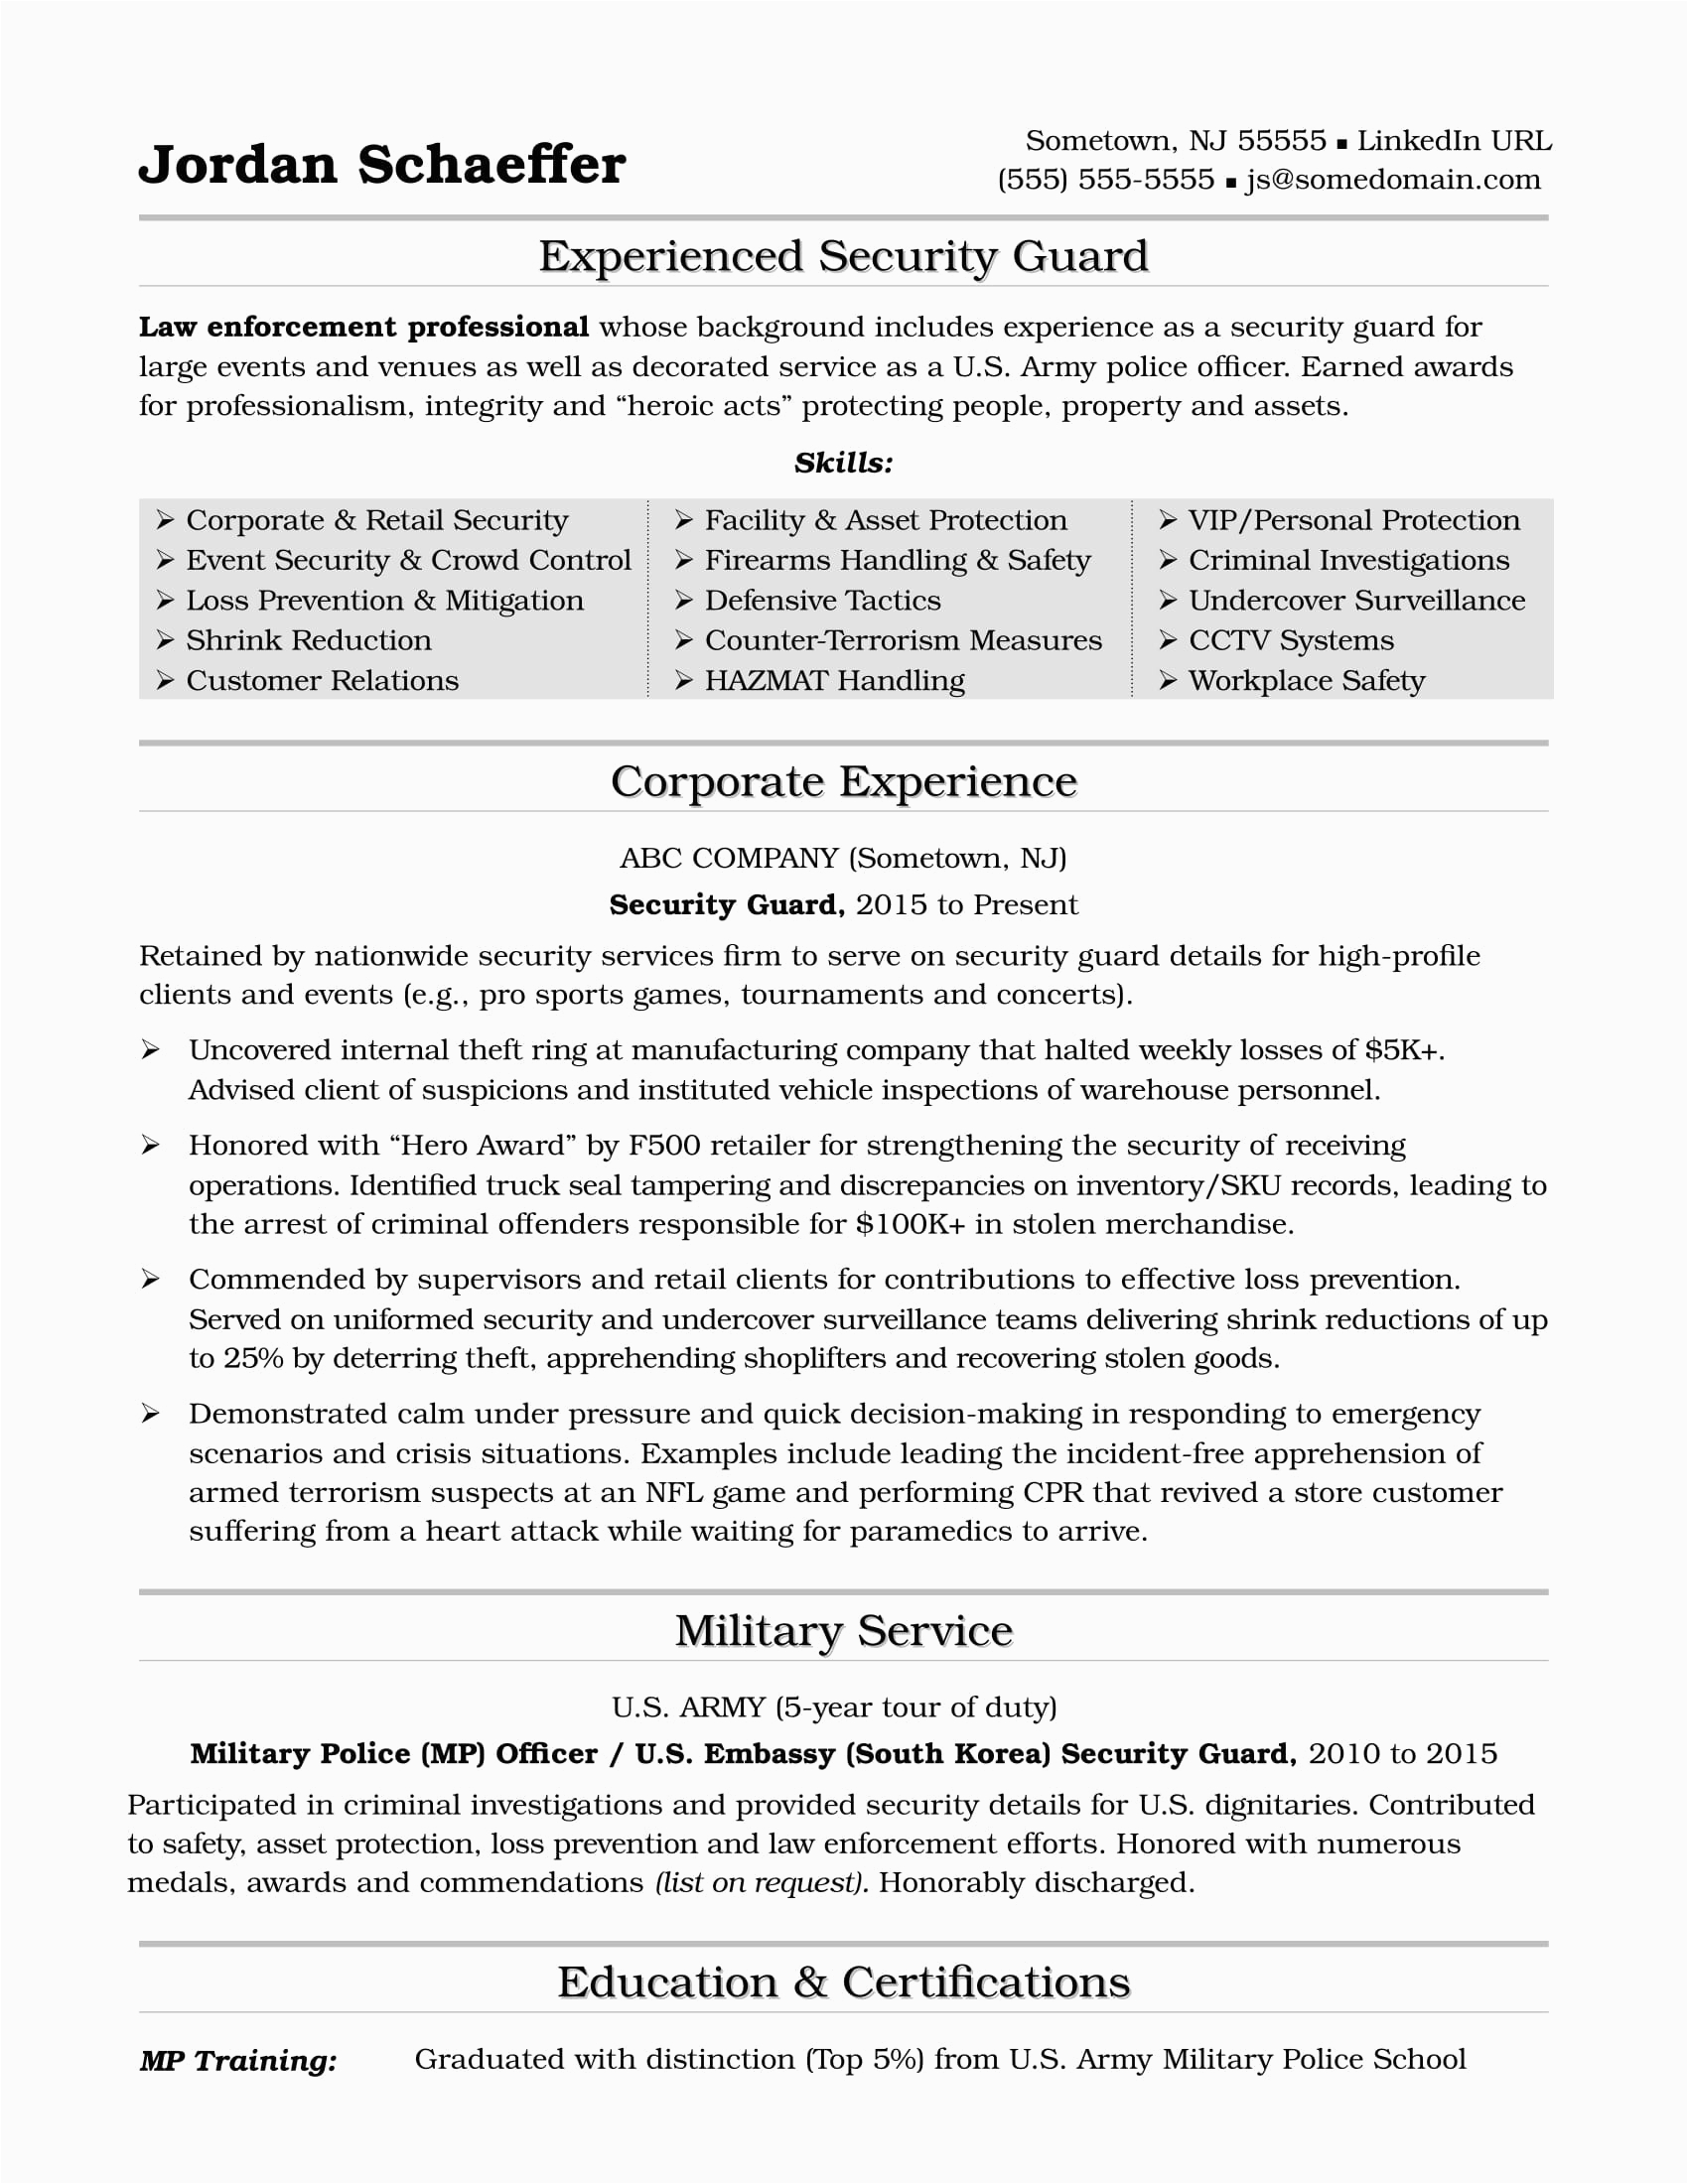 Sample Resume Objective for Security Guard Security Guard Resume